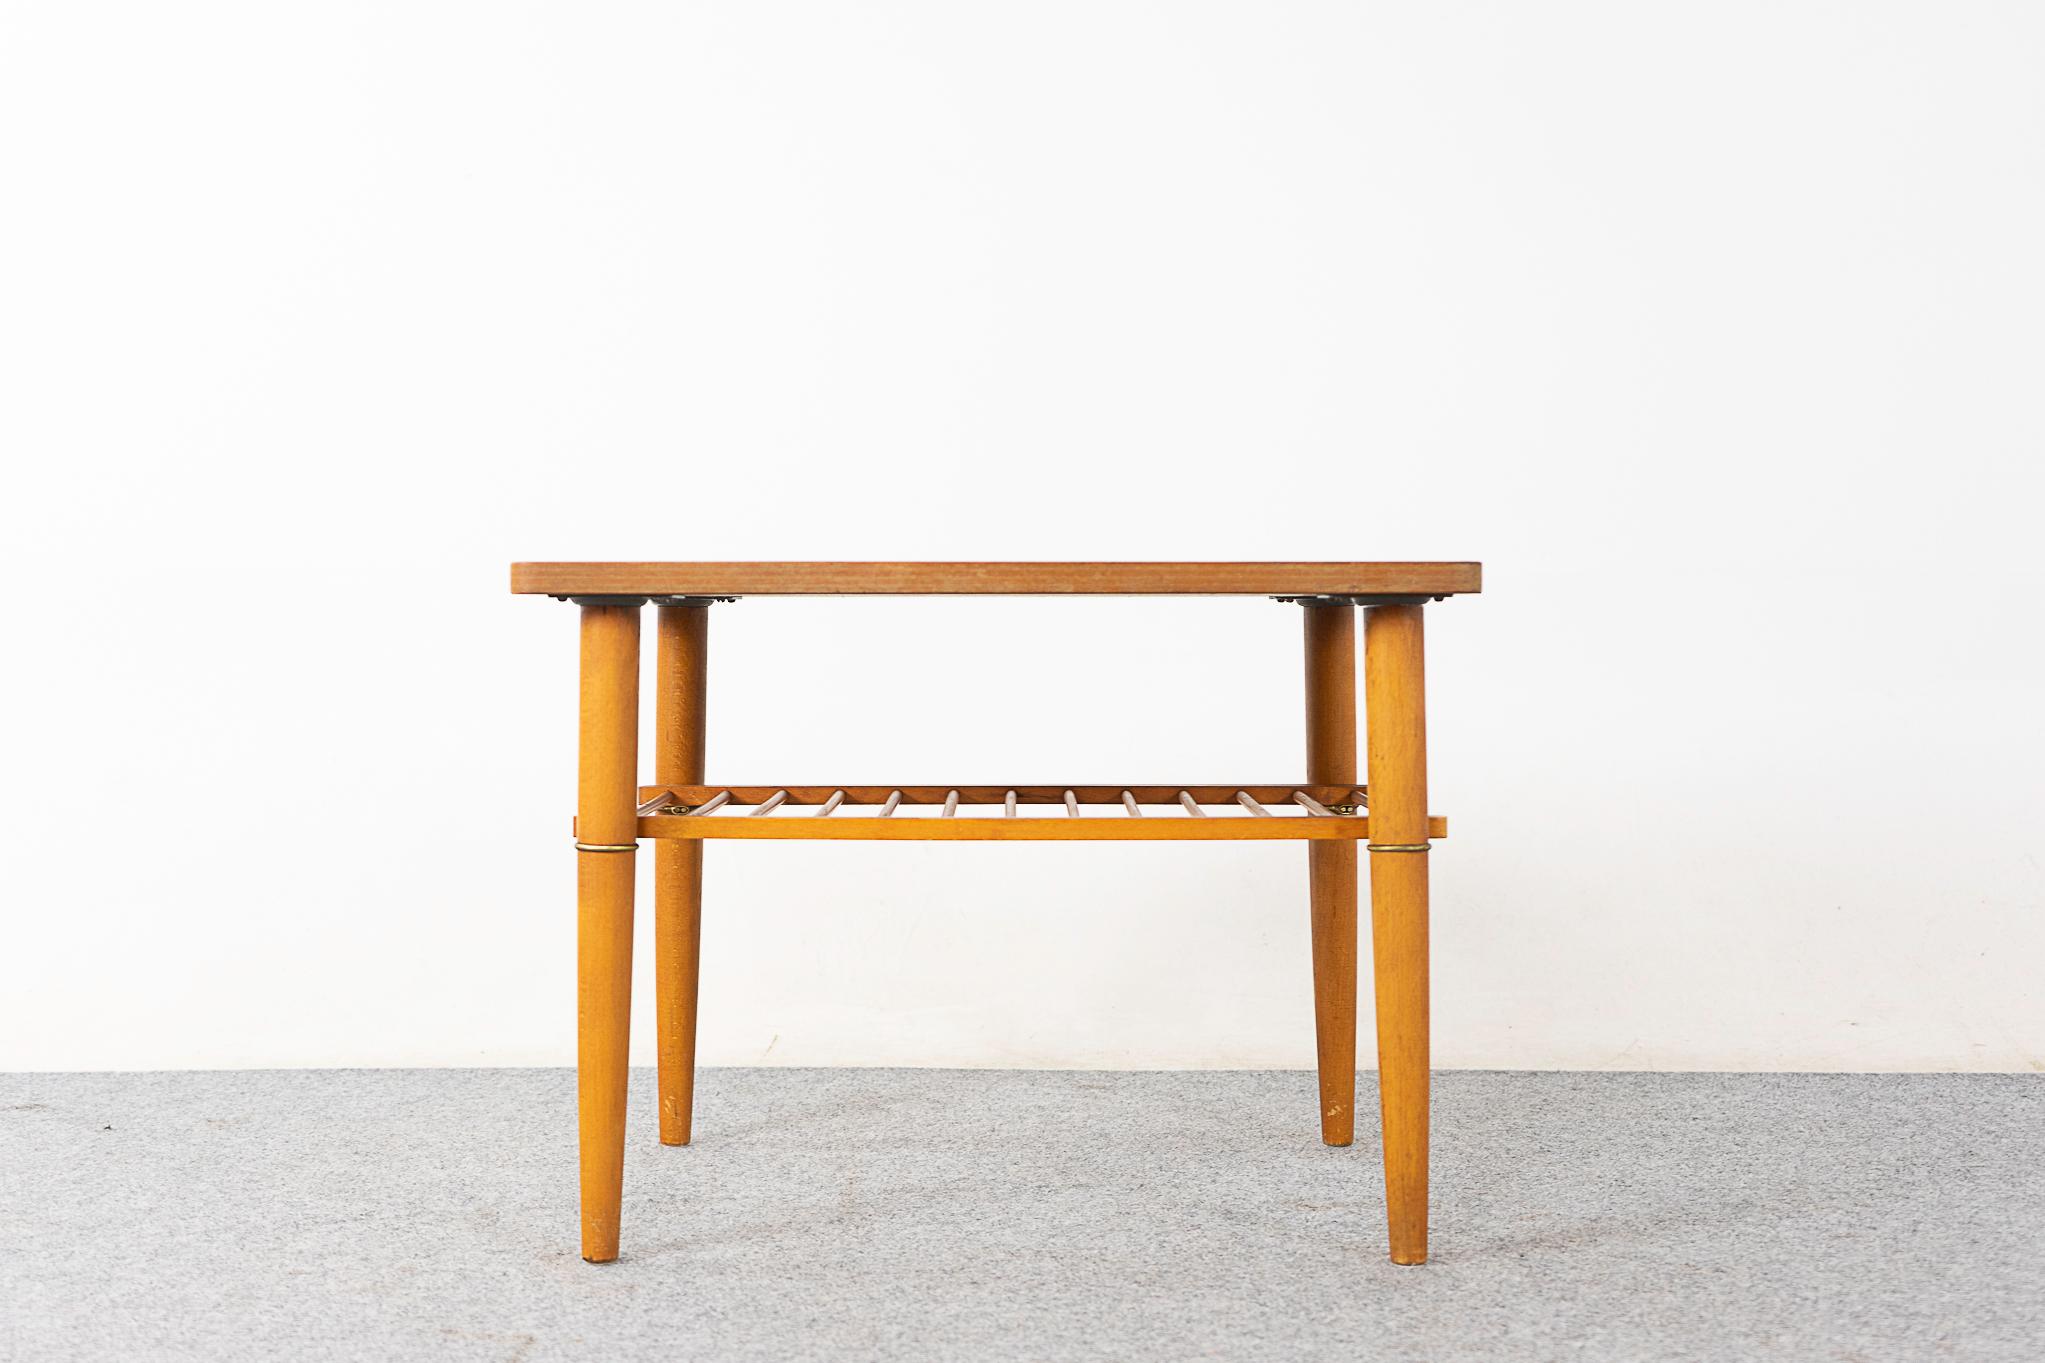 Teak & beech mid-century side table, circa 1960's. Compact size with lovely metal ring accents and slatted shelf. Handsome book-matched veneer teak on top and solid beechwood legs.